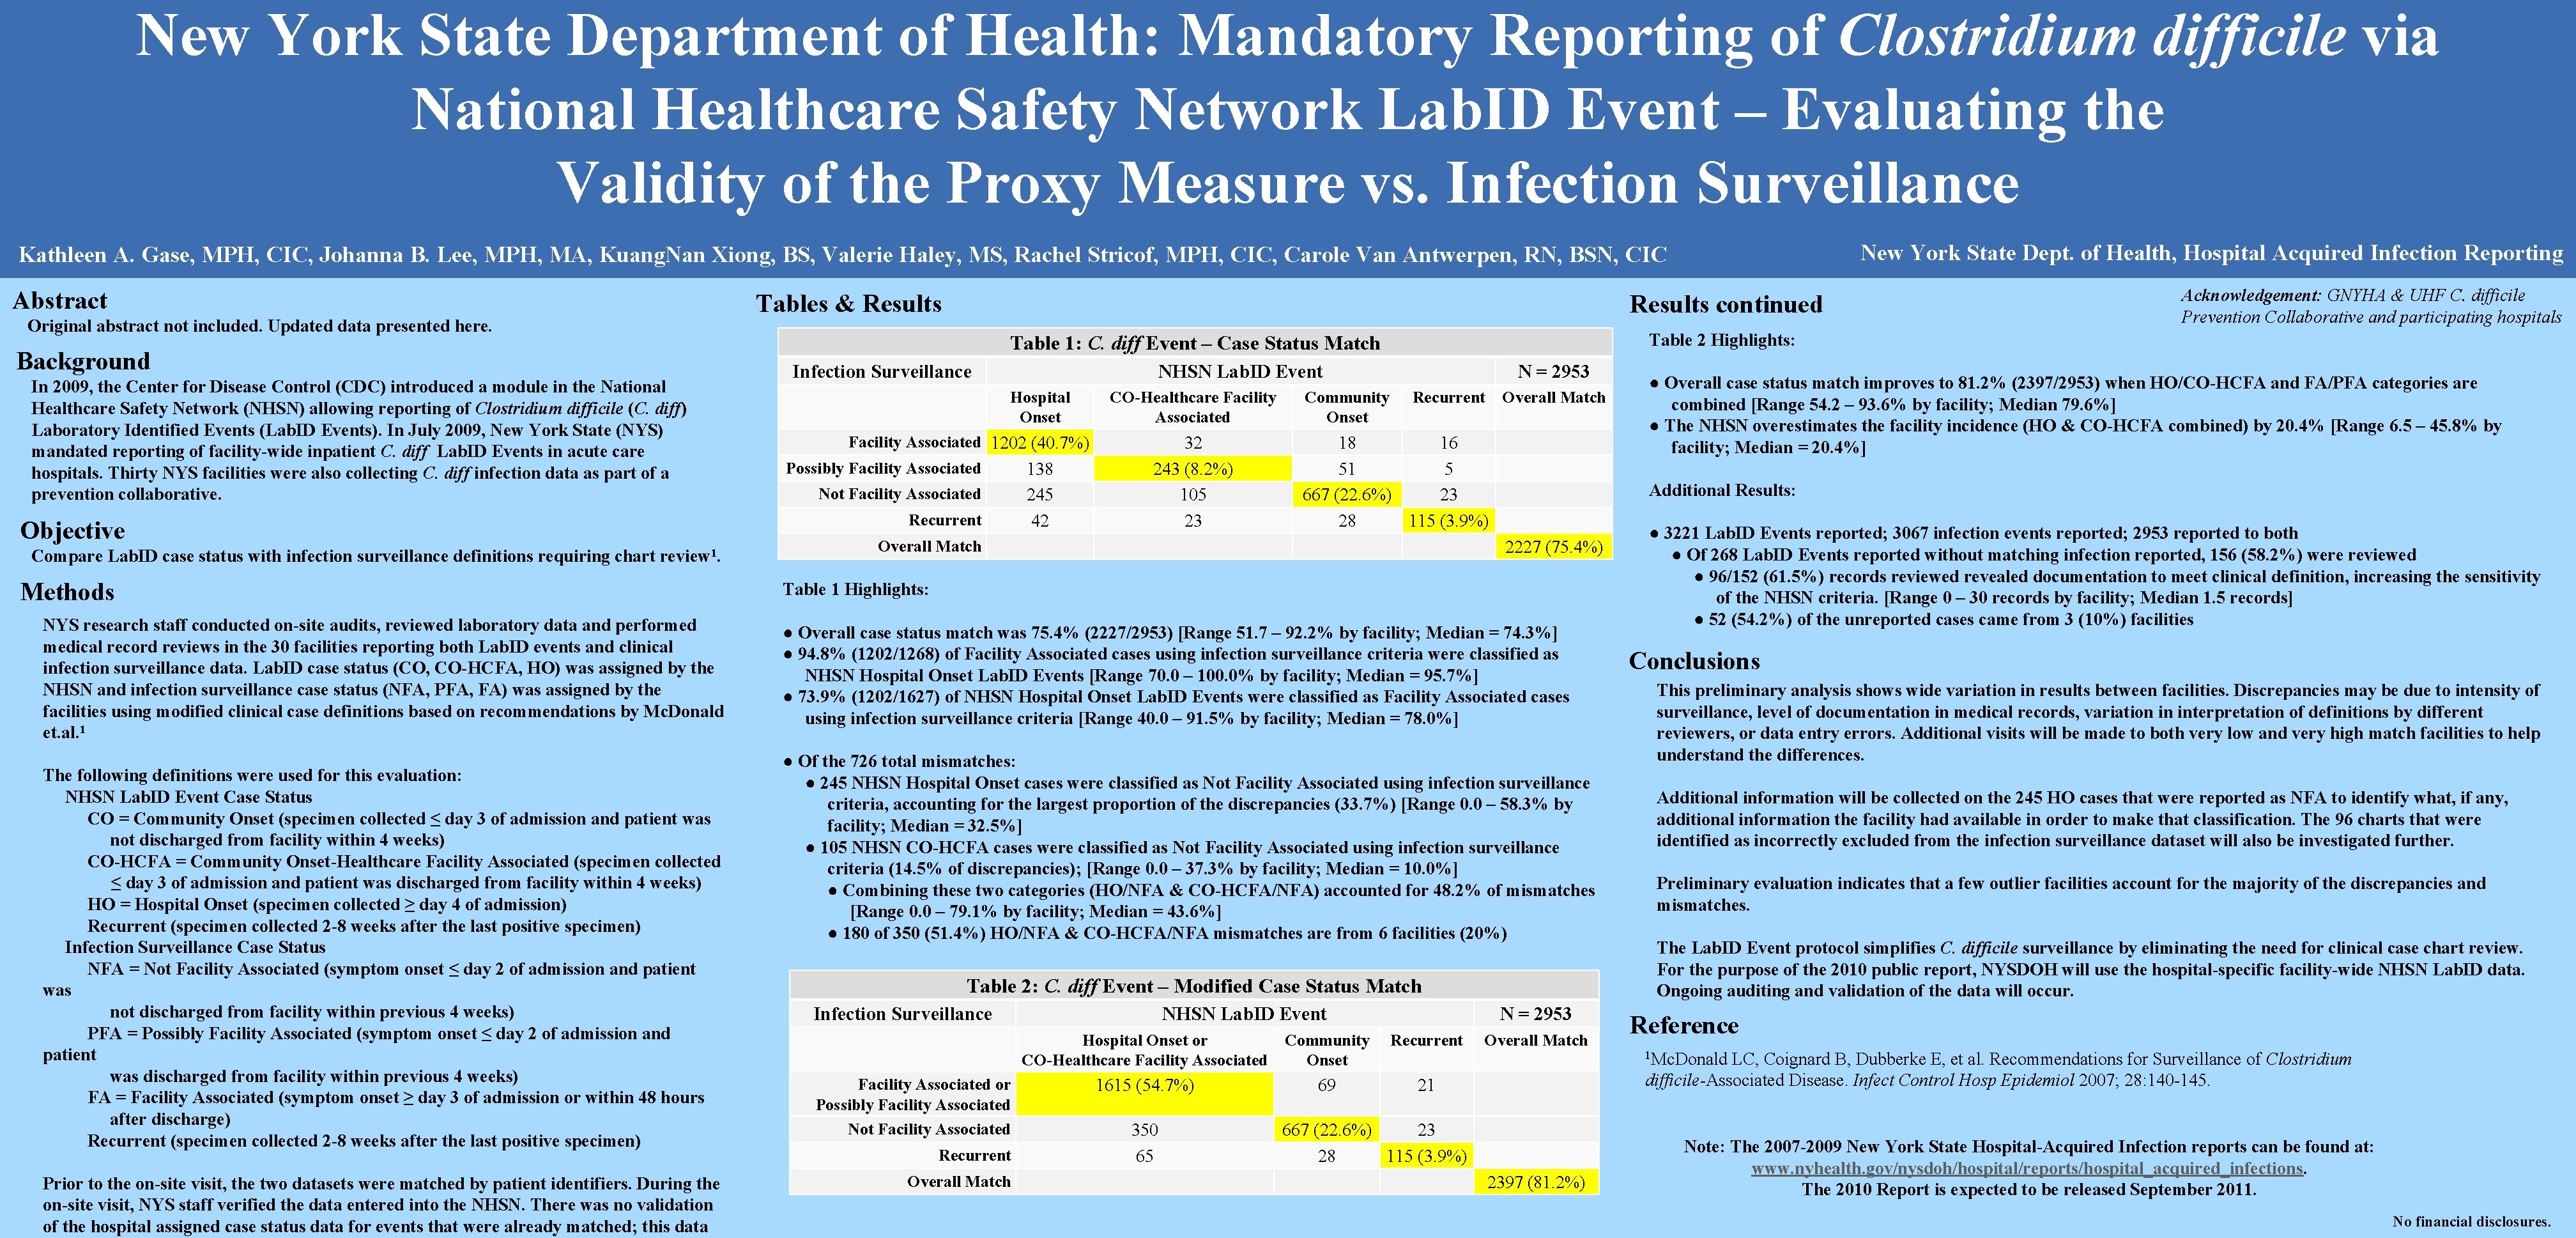 New York State Department of Health: Mandatory Reporting of Clostridium difficile via National Healthcare